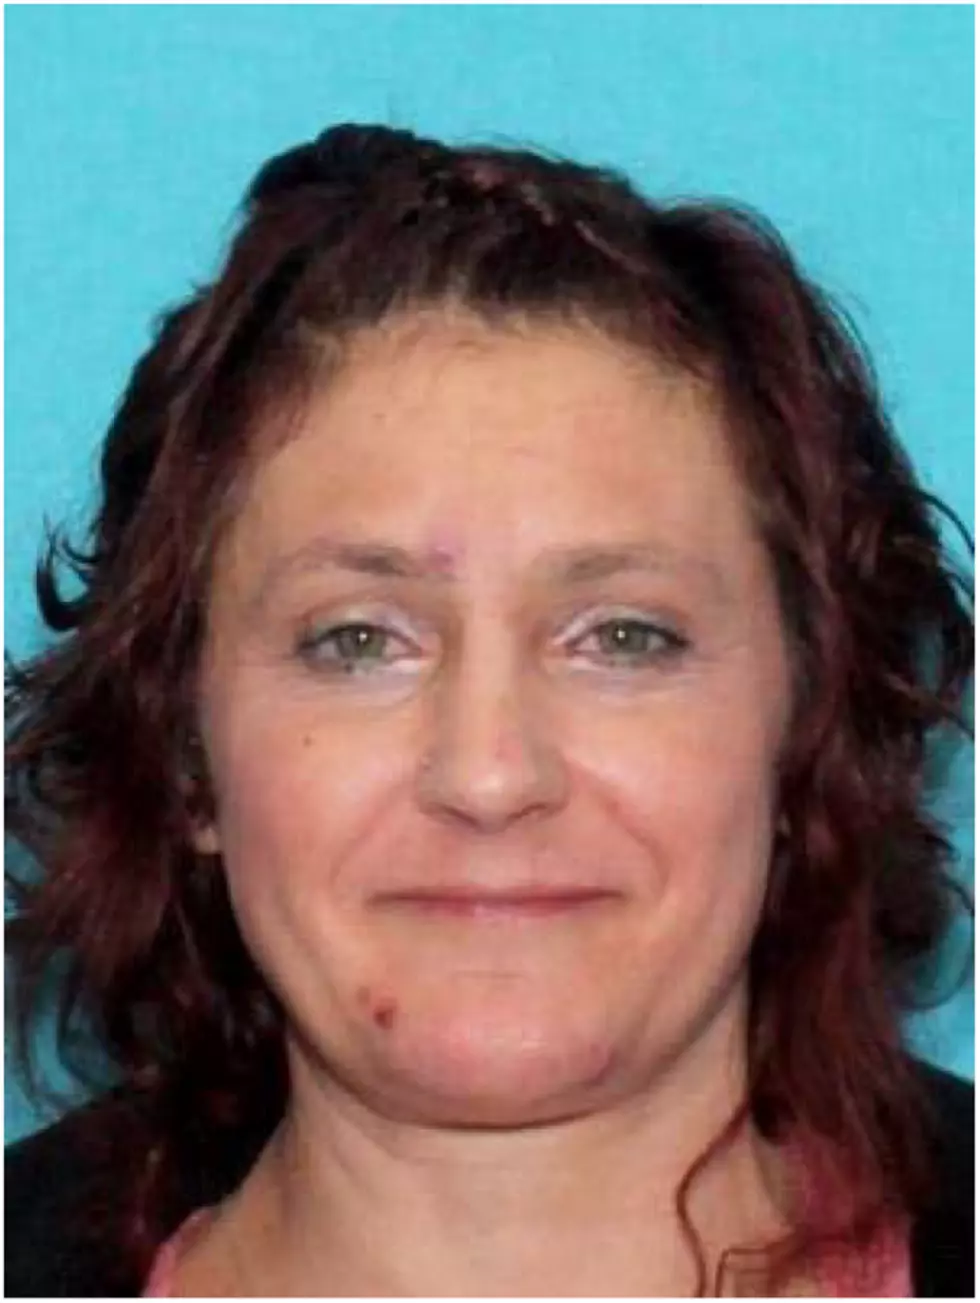 Deputies search for 47-year-old woman in connection with Finley stabbing